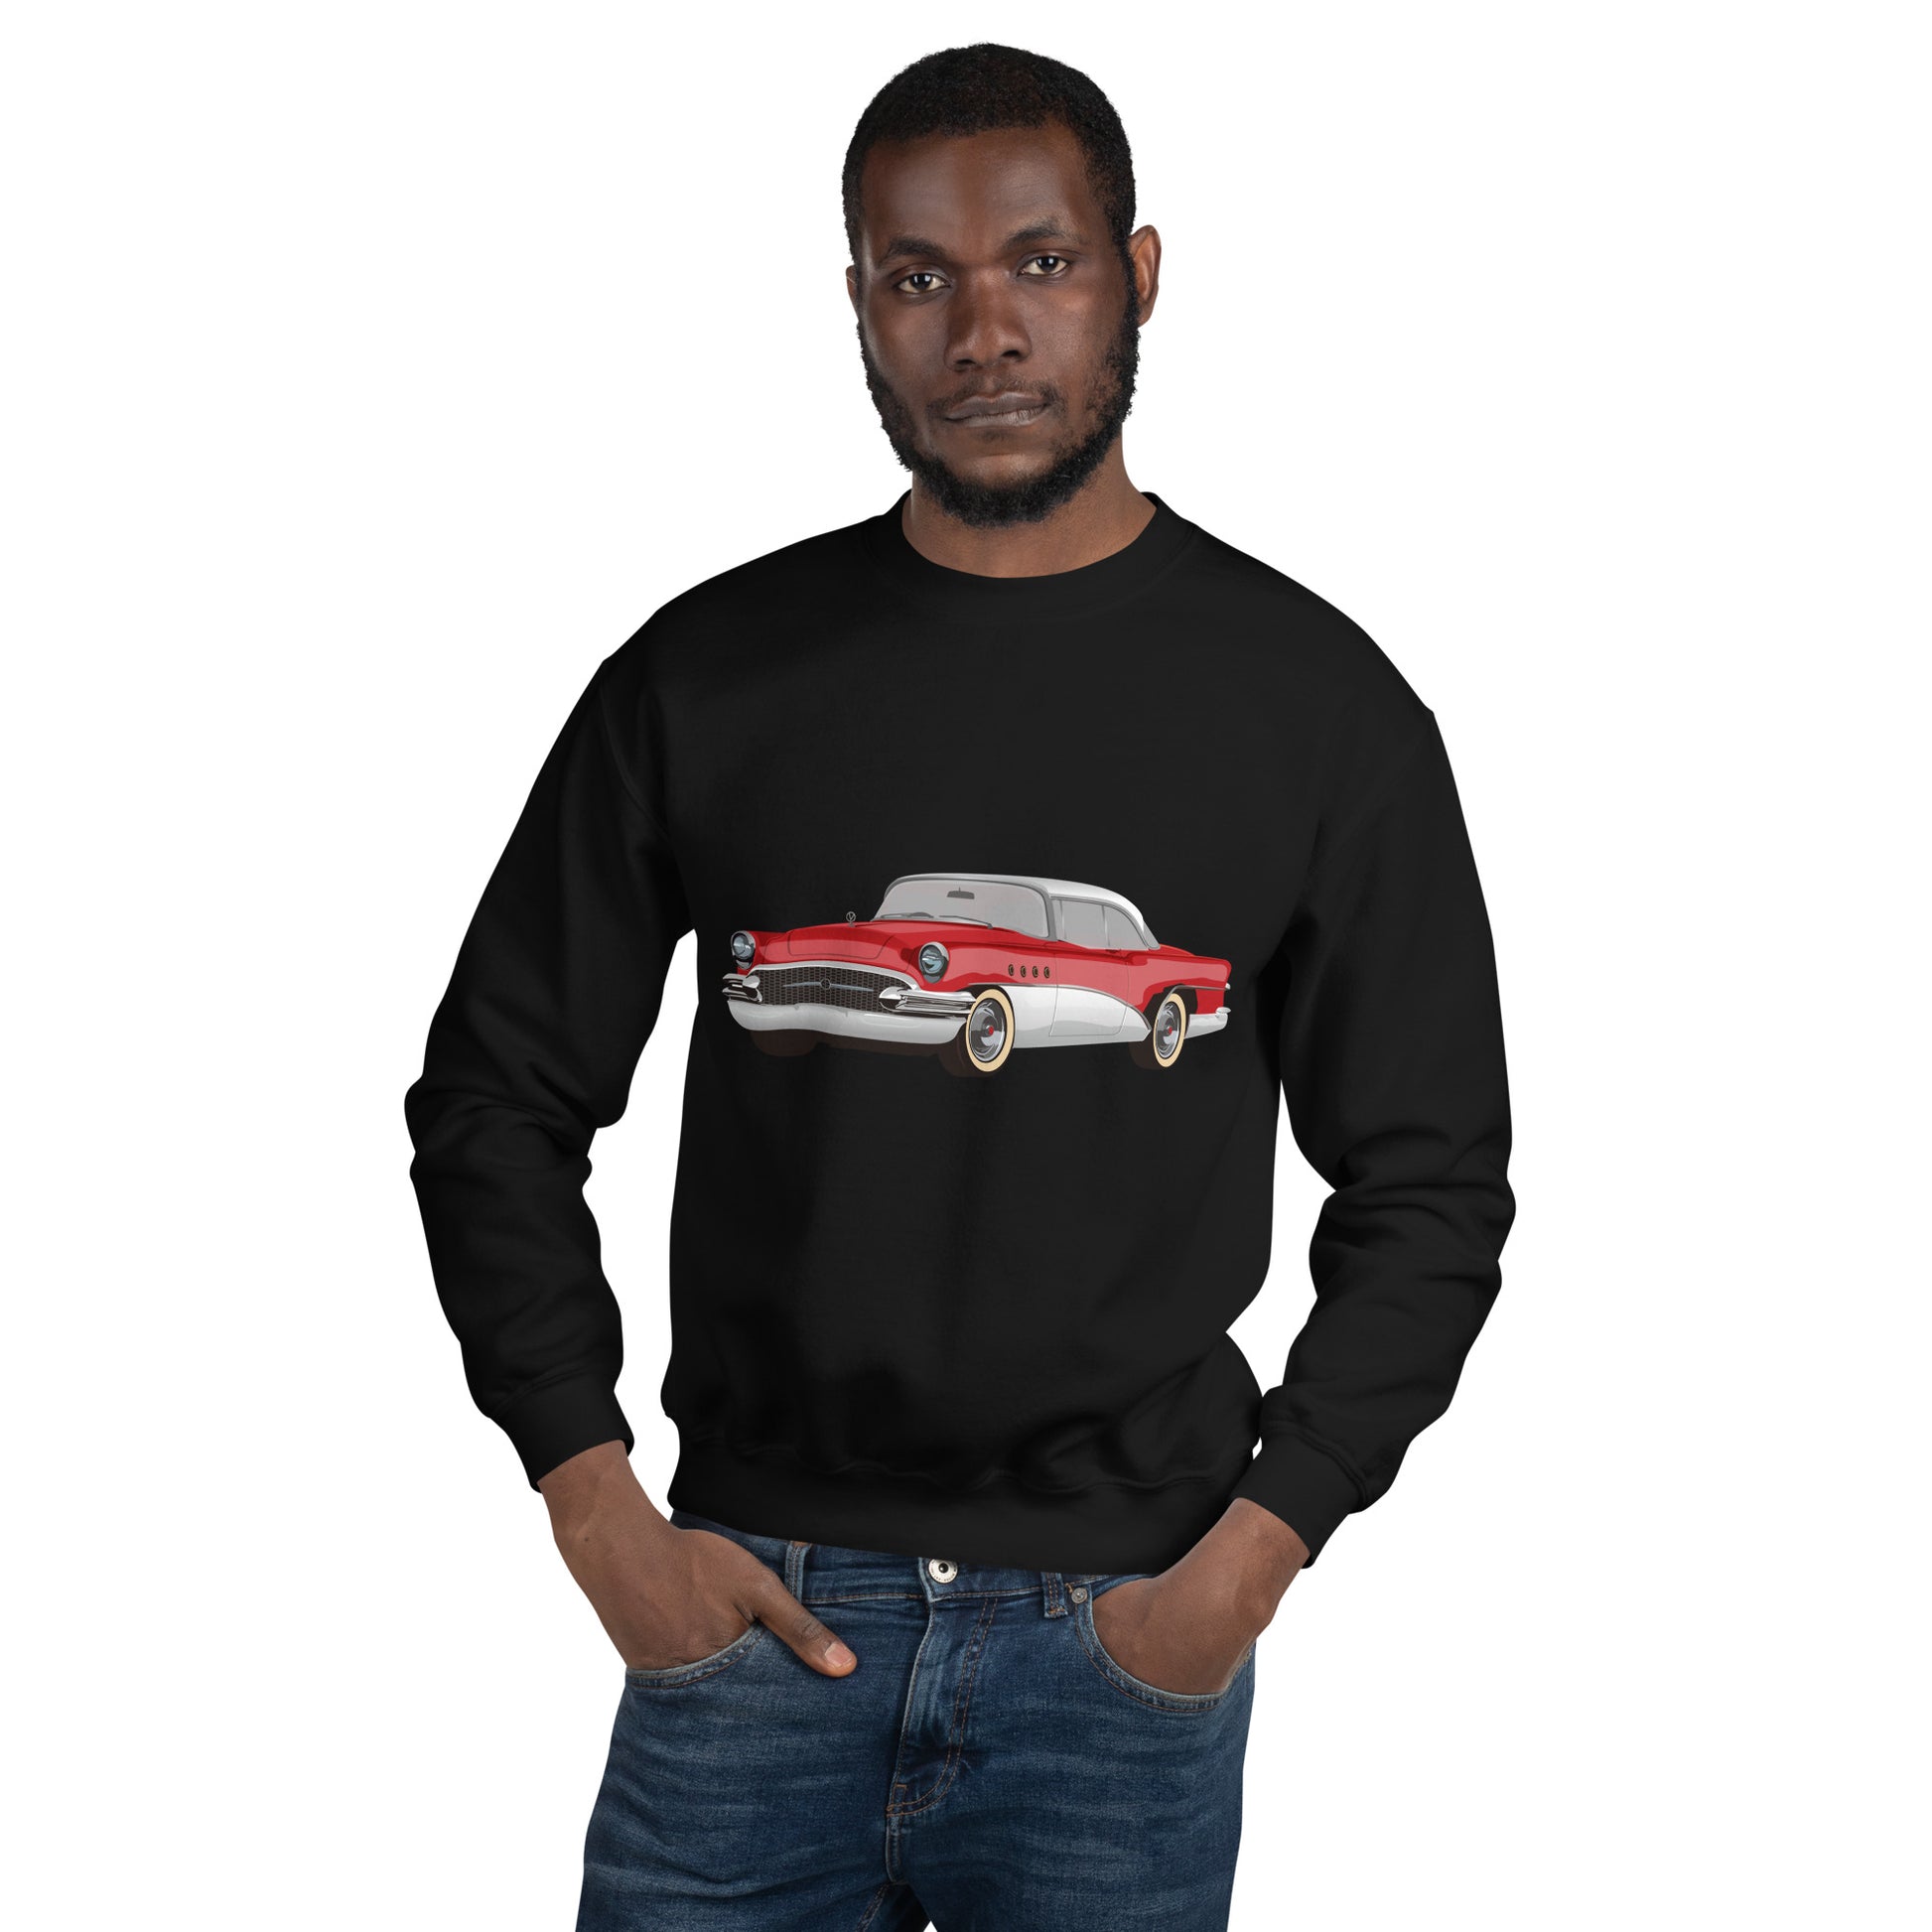 Man with black sweatshirt with red chevrolet